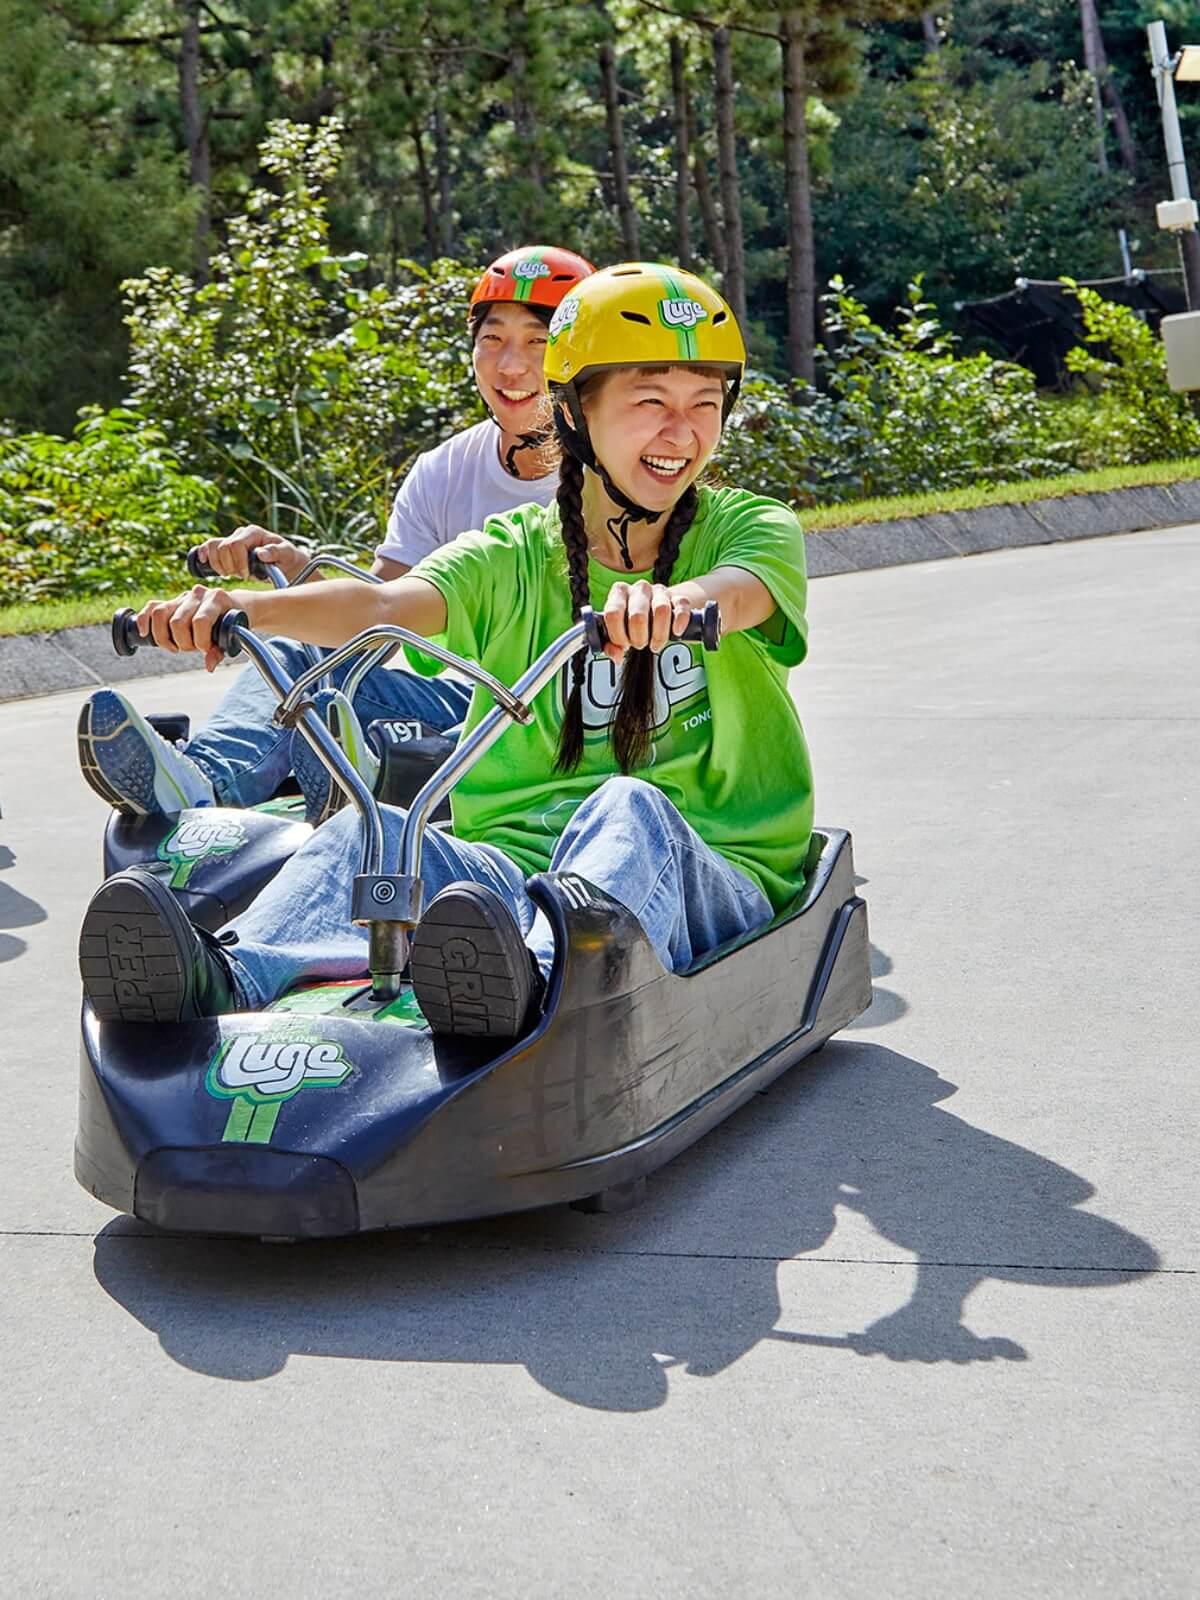 A woman smiles as she rides the Luge tracks.